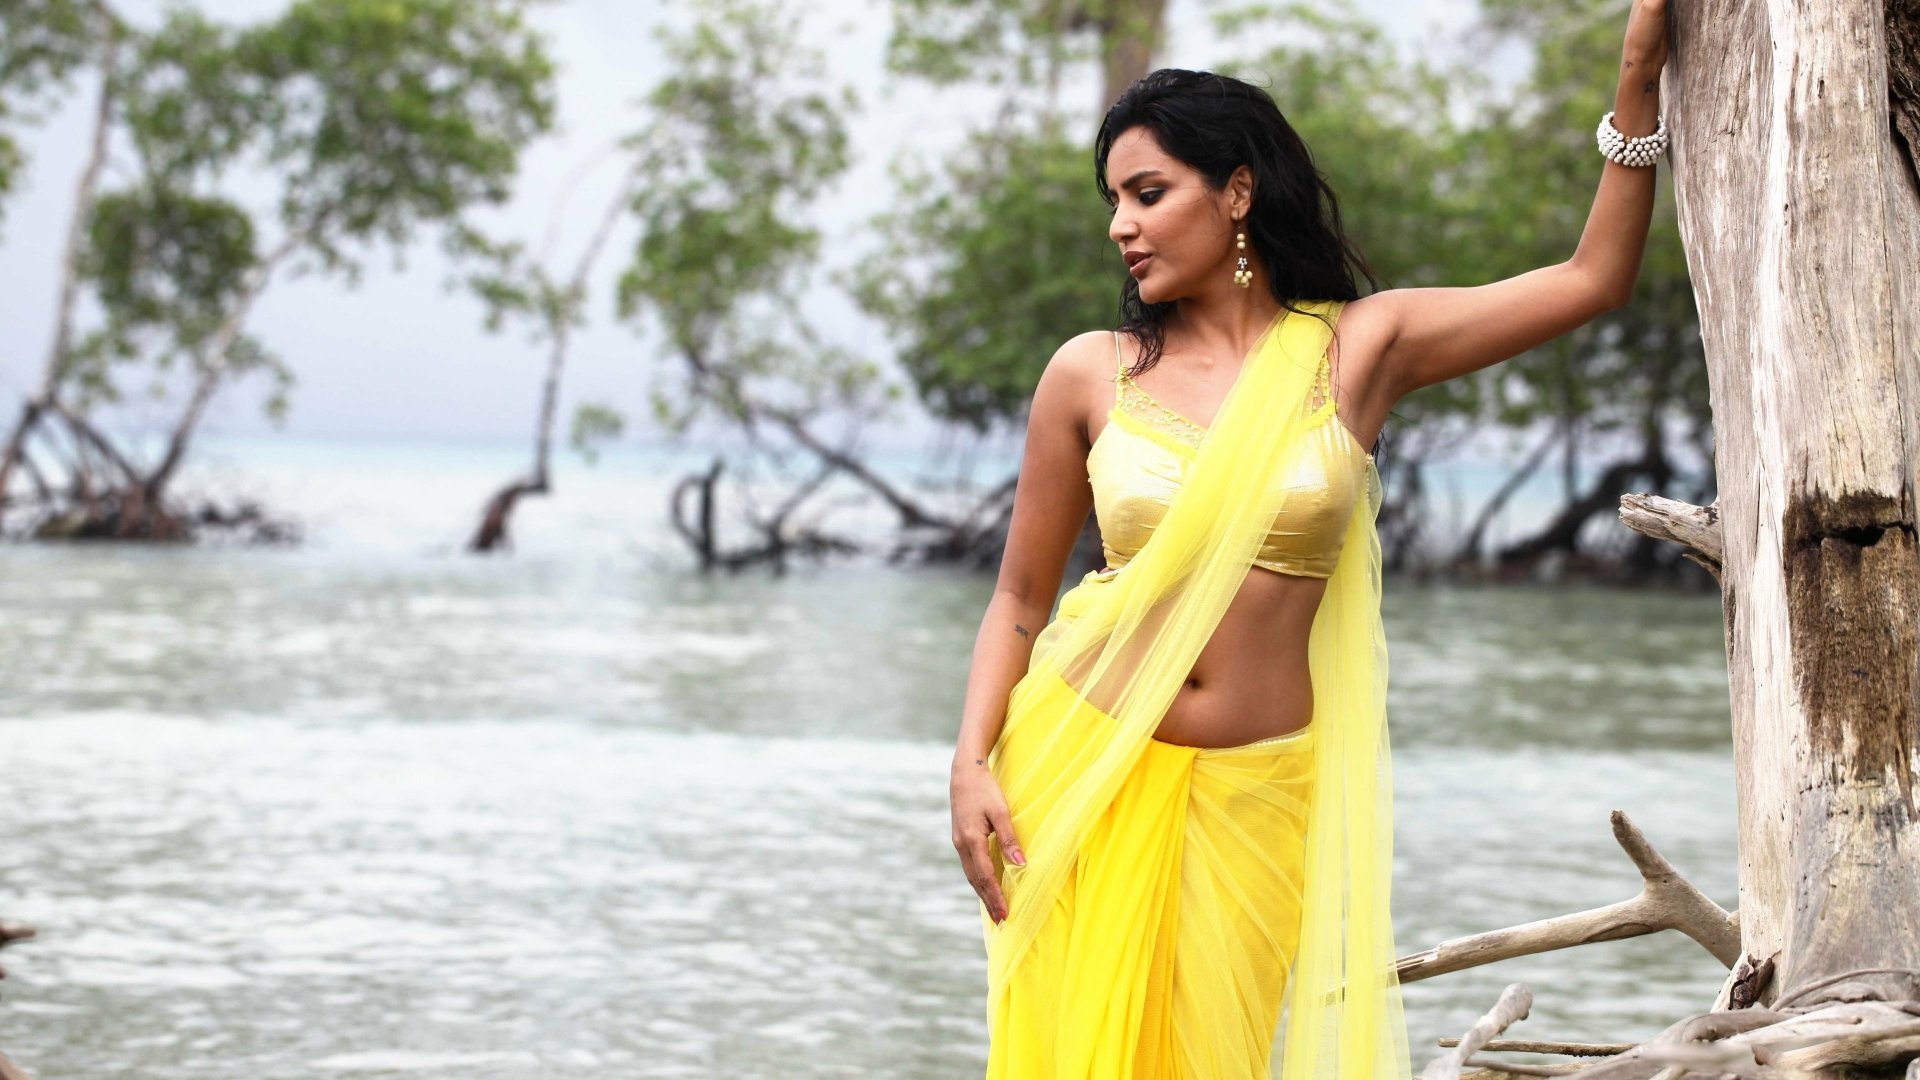 4K Priya Anand Wallpapers Background Images.